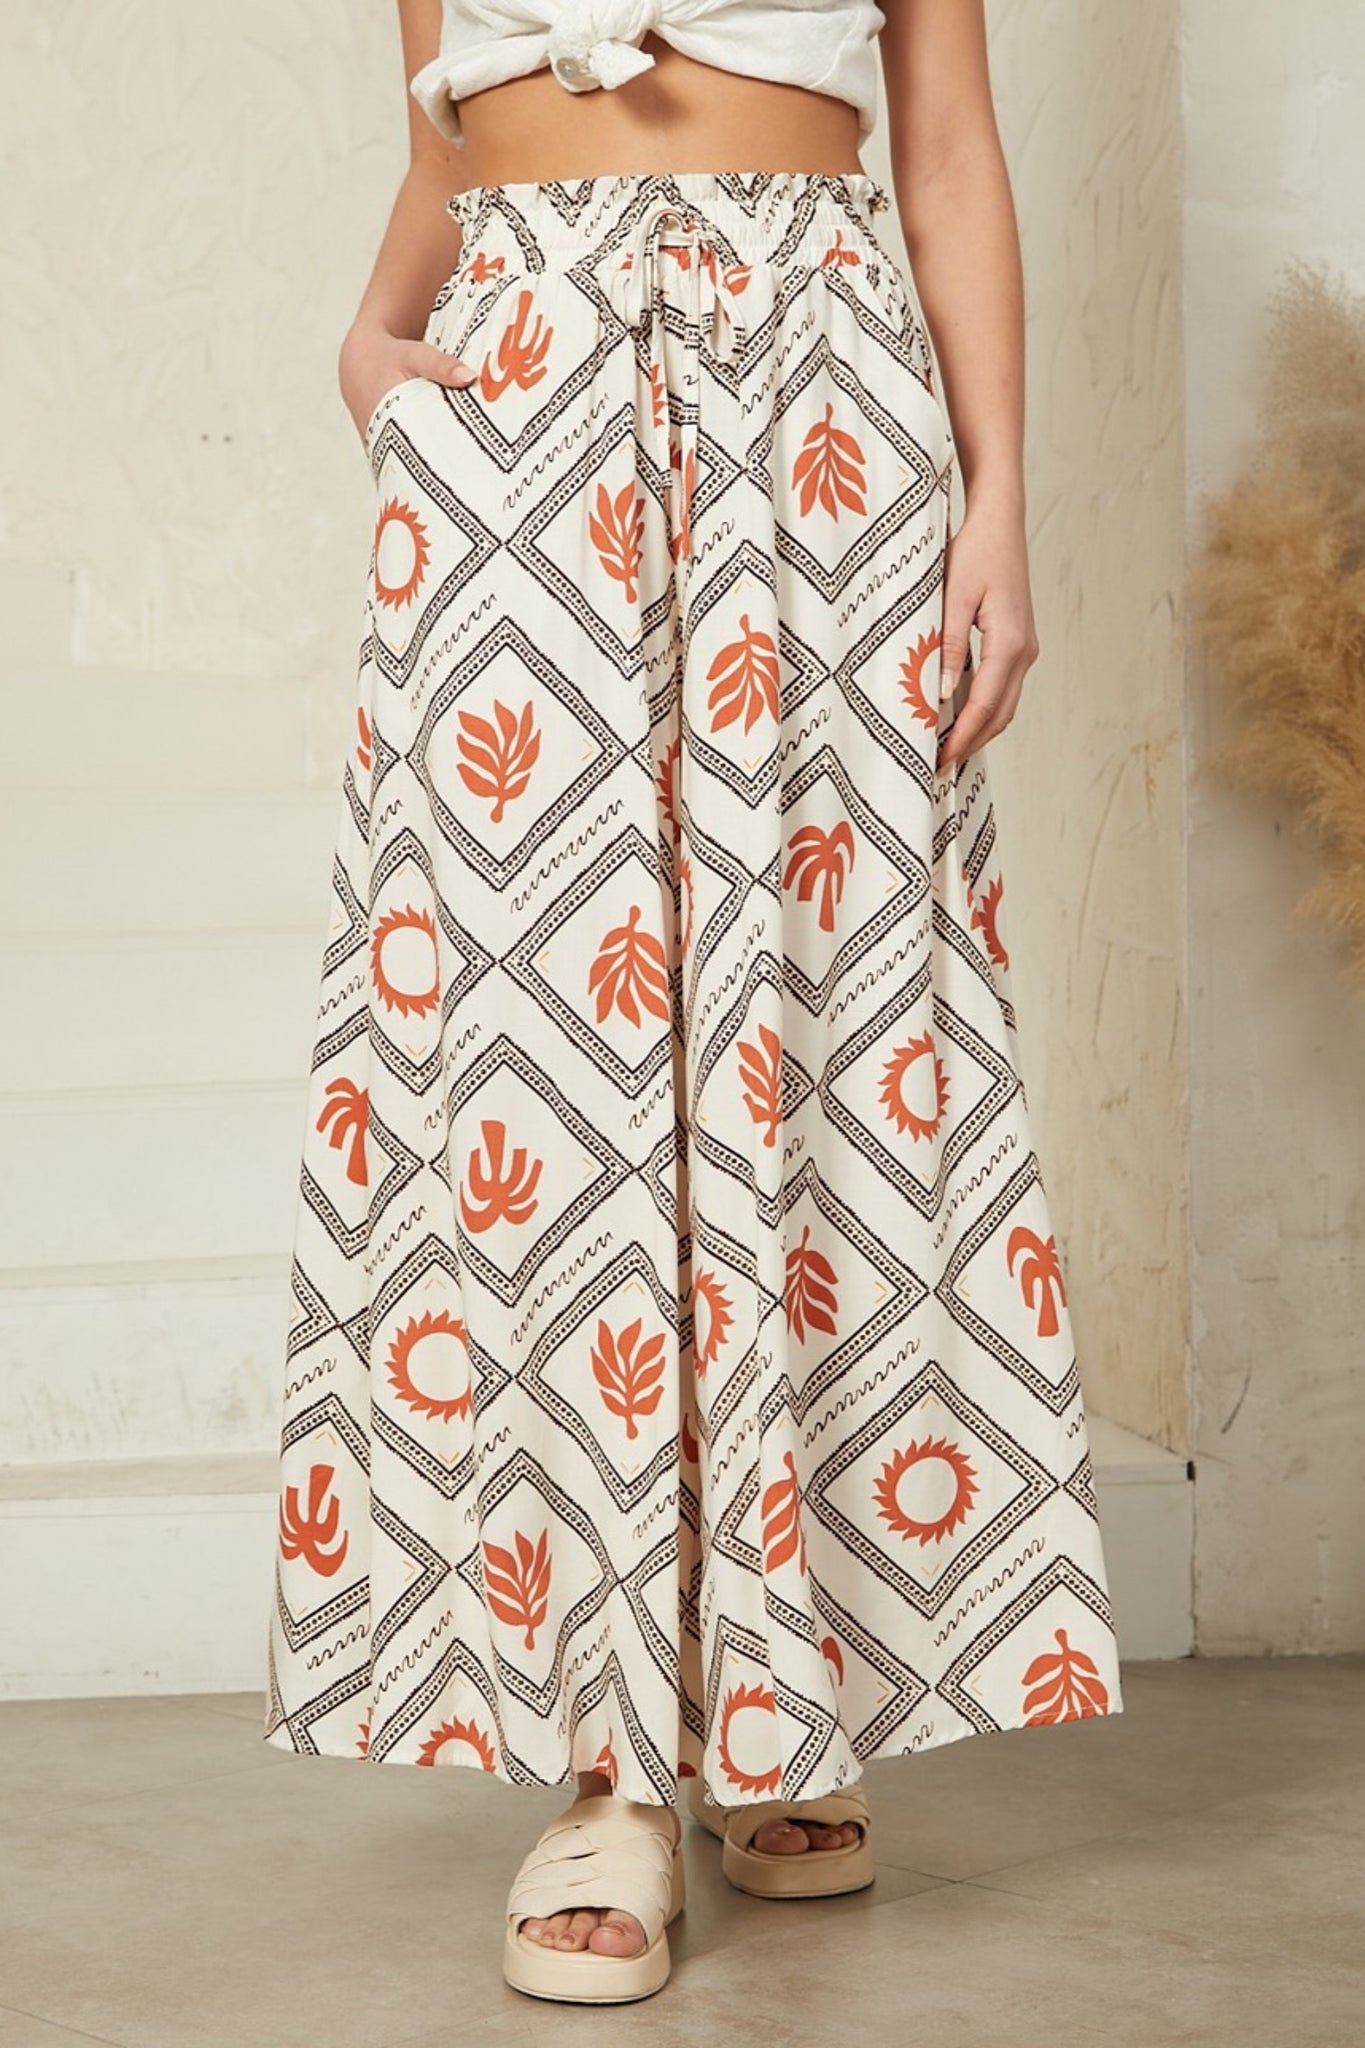 Mezza Pants - Paper Bag High Waisted Wide Leg Pant in Tuscan Sun